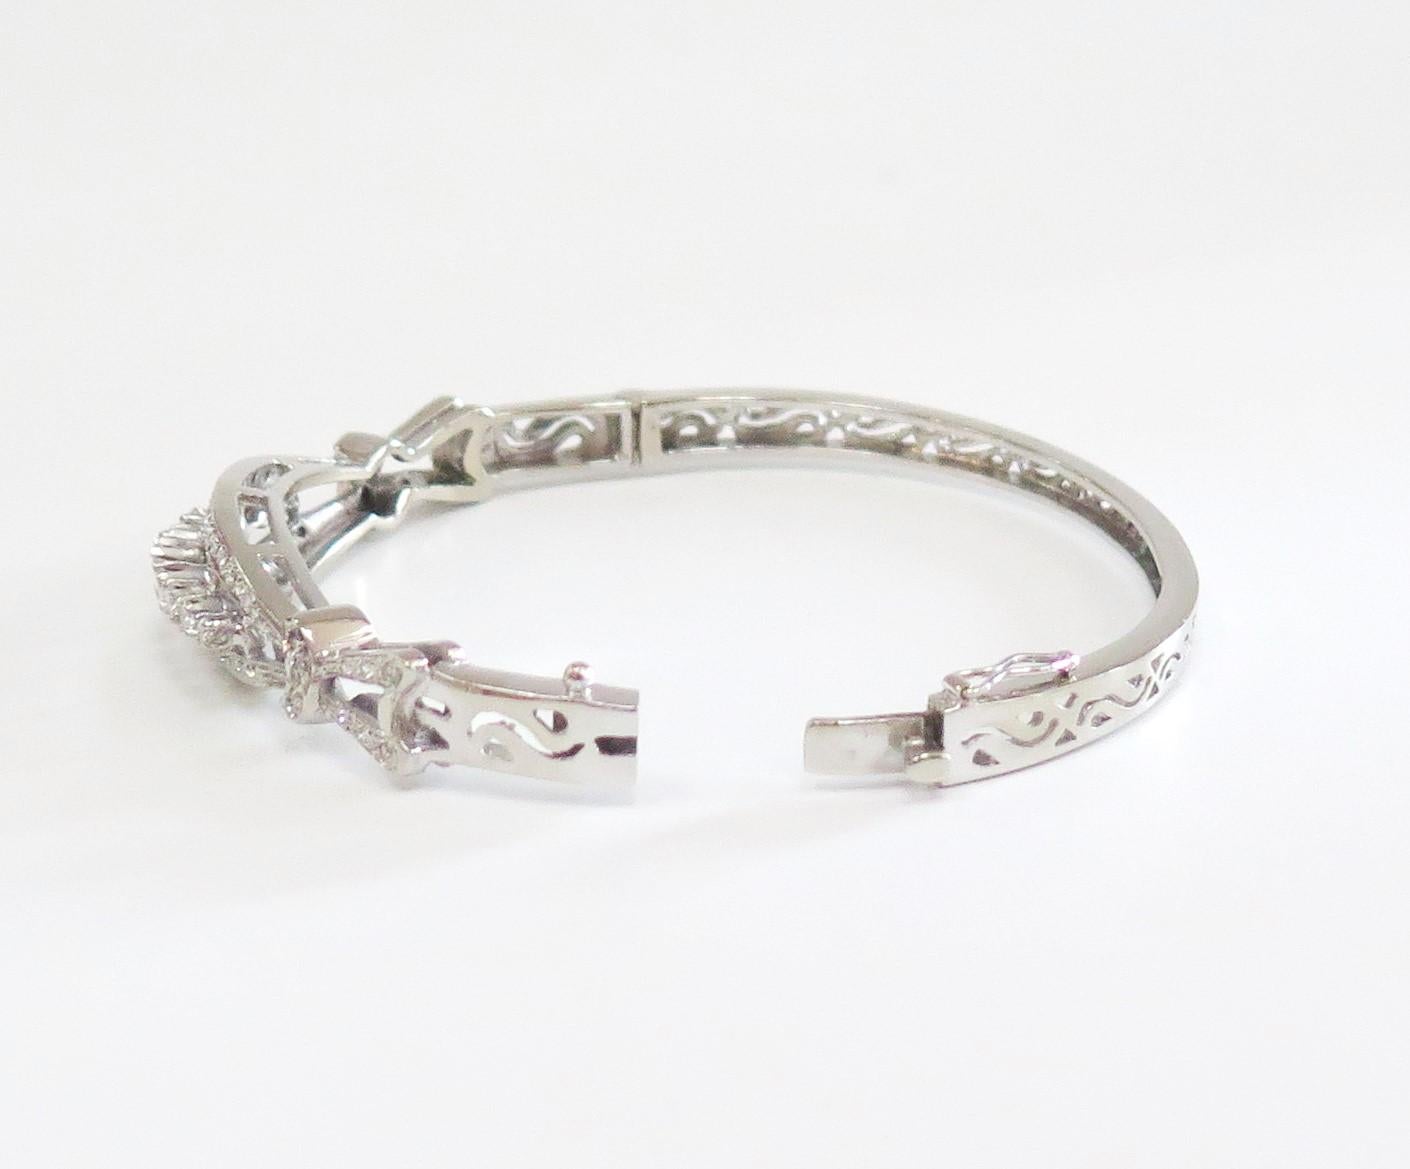 Beautiful 14 Karat White Gold vintage Bangle Bracelet has 1.00 Carat total weight in Diamonds. 
Color: F-H, Clarity: VS/SI.
Weight: 19.6 Grams.

Fits standard 7 inch wrist comfortably.
Lock is tight and has a safety.